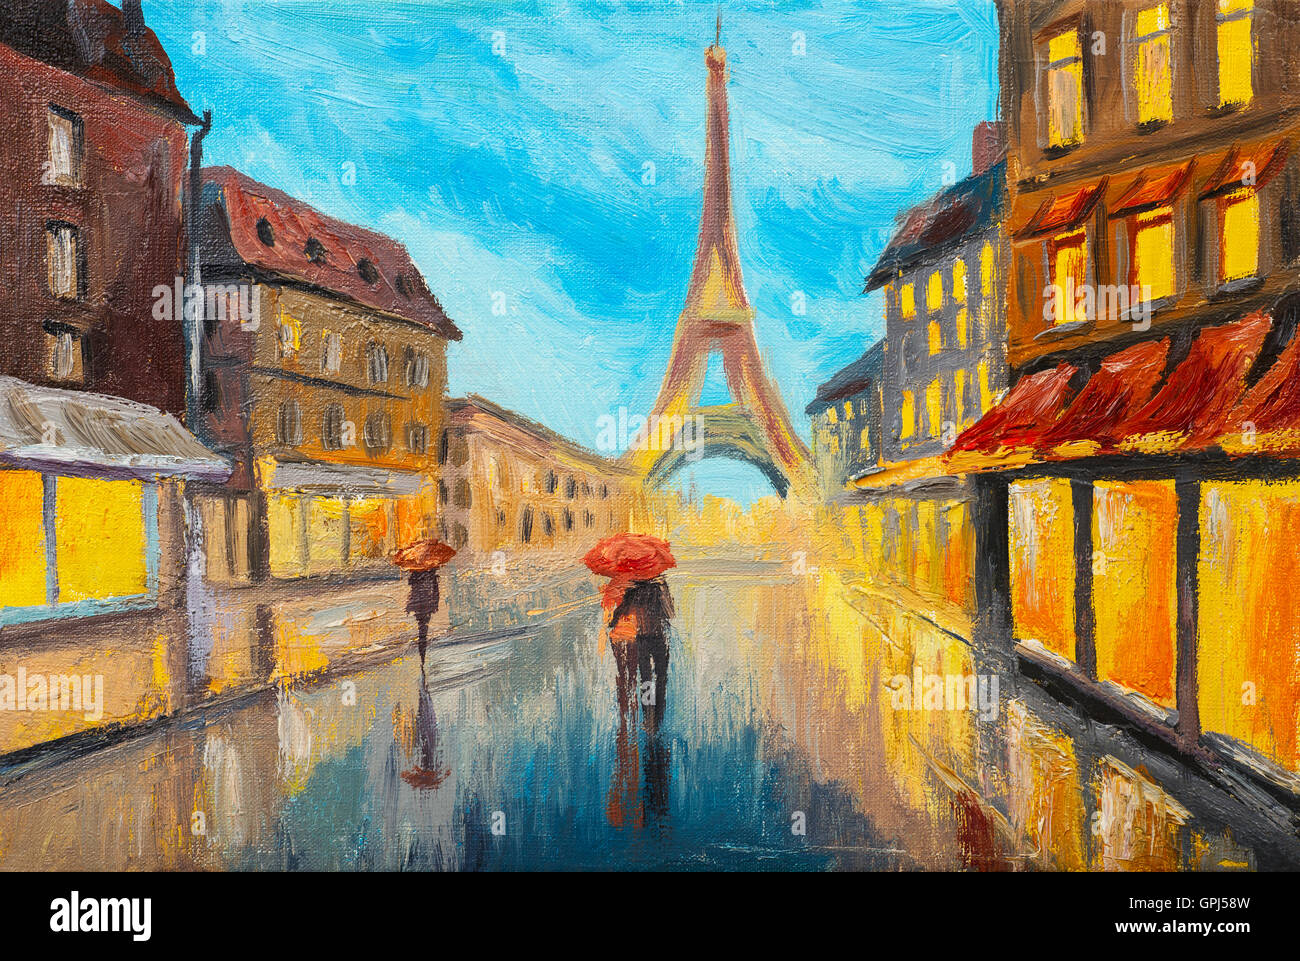 Oil painting of Eiffel tower, France Stock Photo